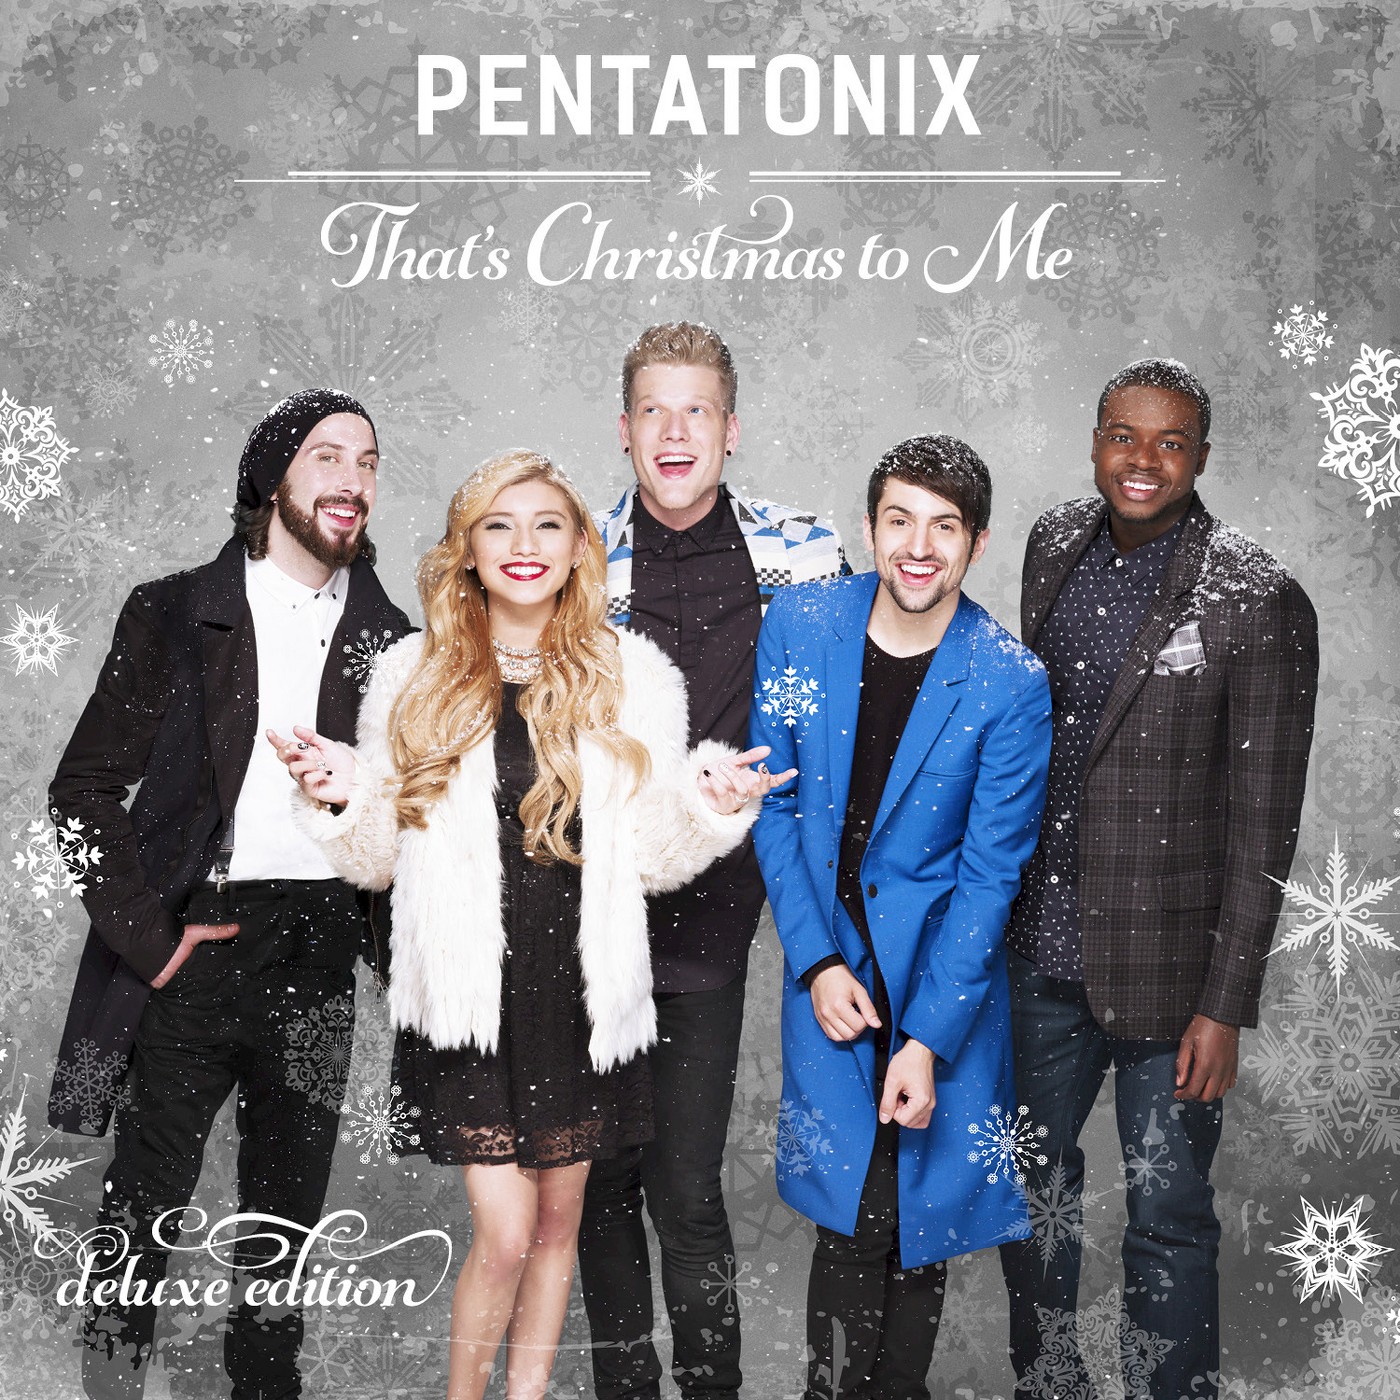 That's Christmas to Me [Deluxe Edition] - image 1 of 1